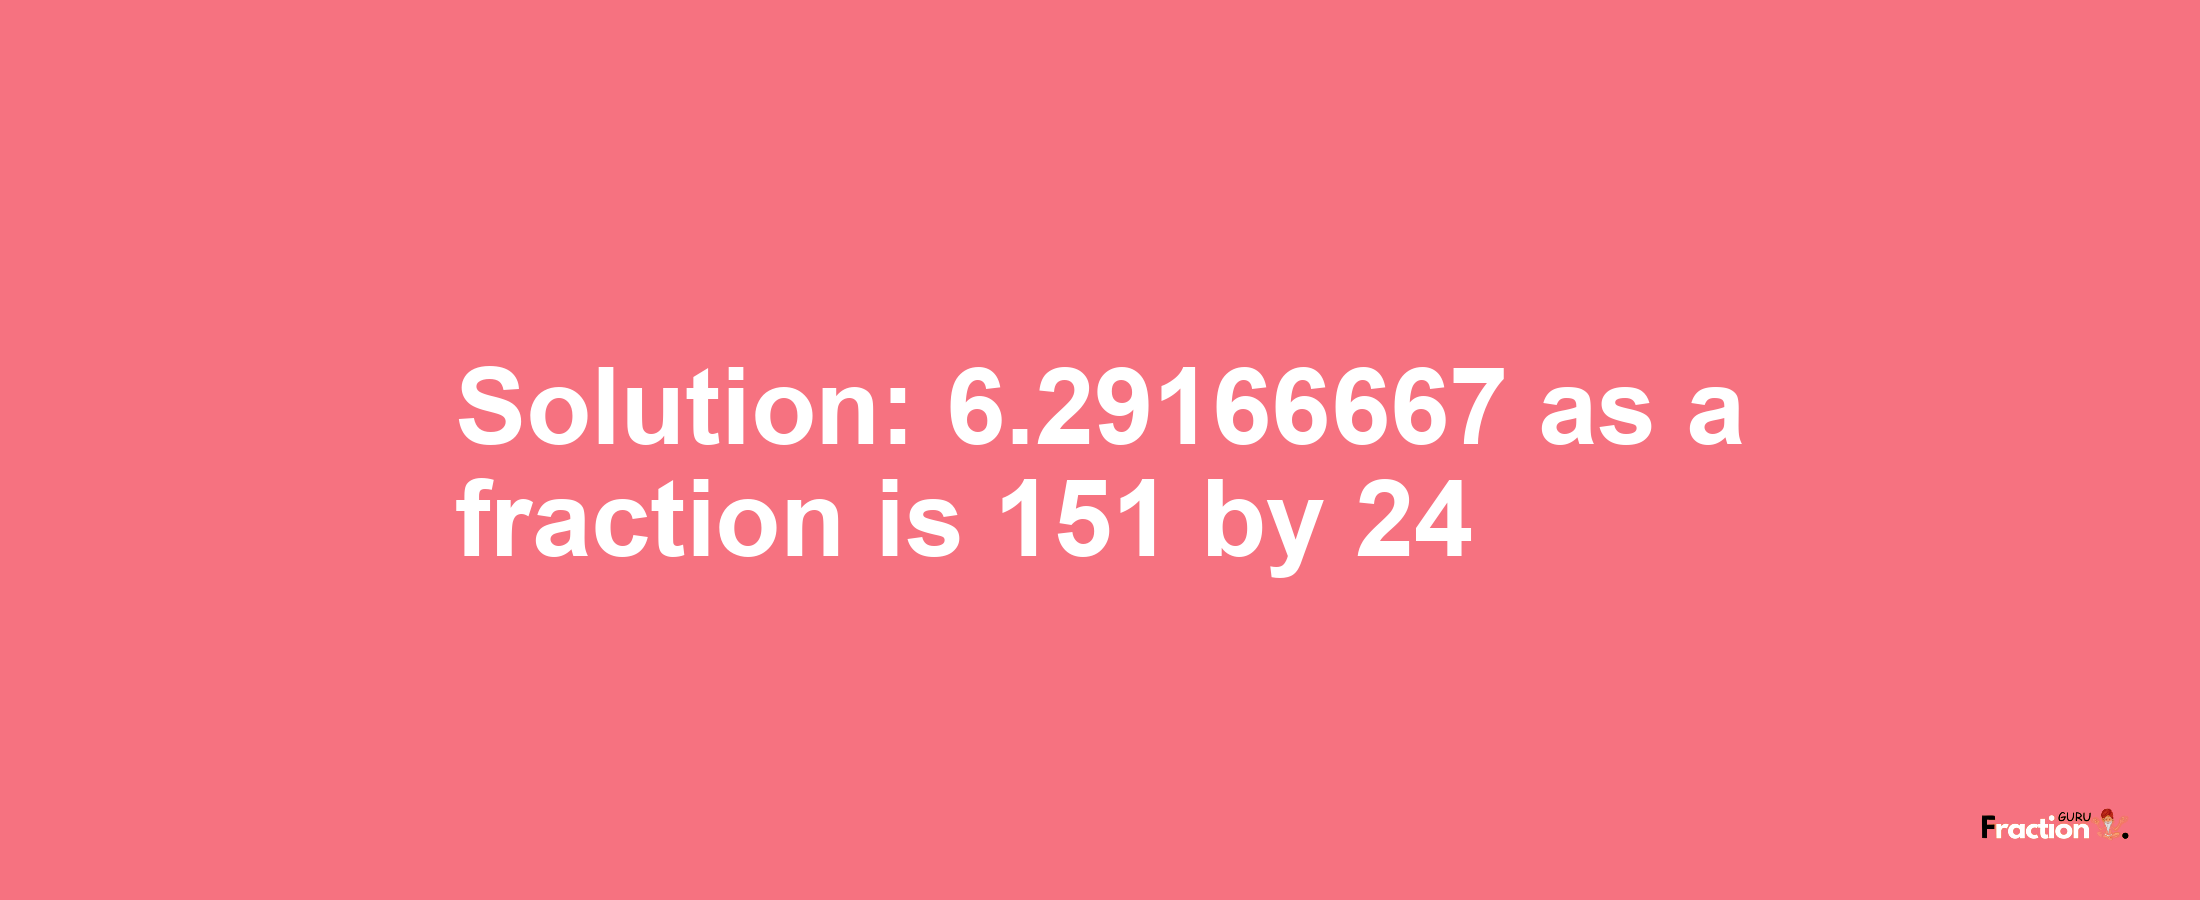 Solution:6.29166667 as a fraction is 151/24